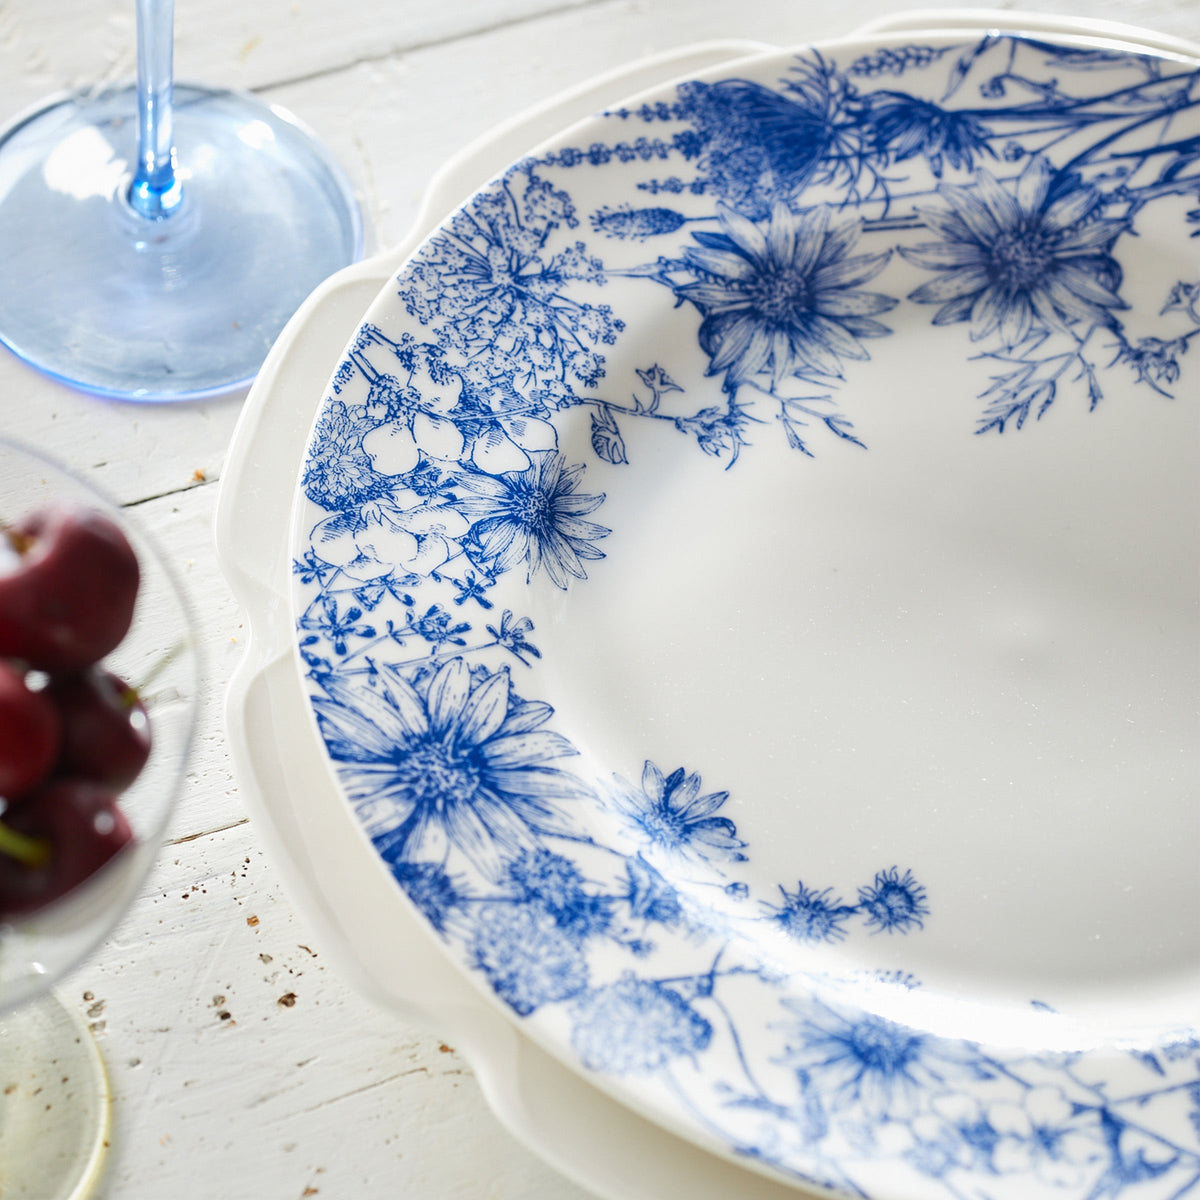 A Summer Blues Rimmed Dinner Plate by Caskata Artisanal Home with a glass of wine.